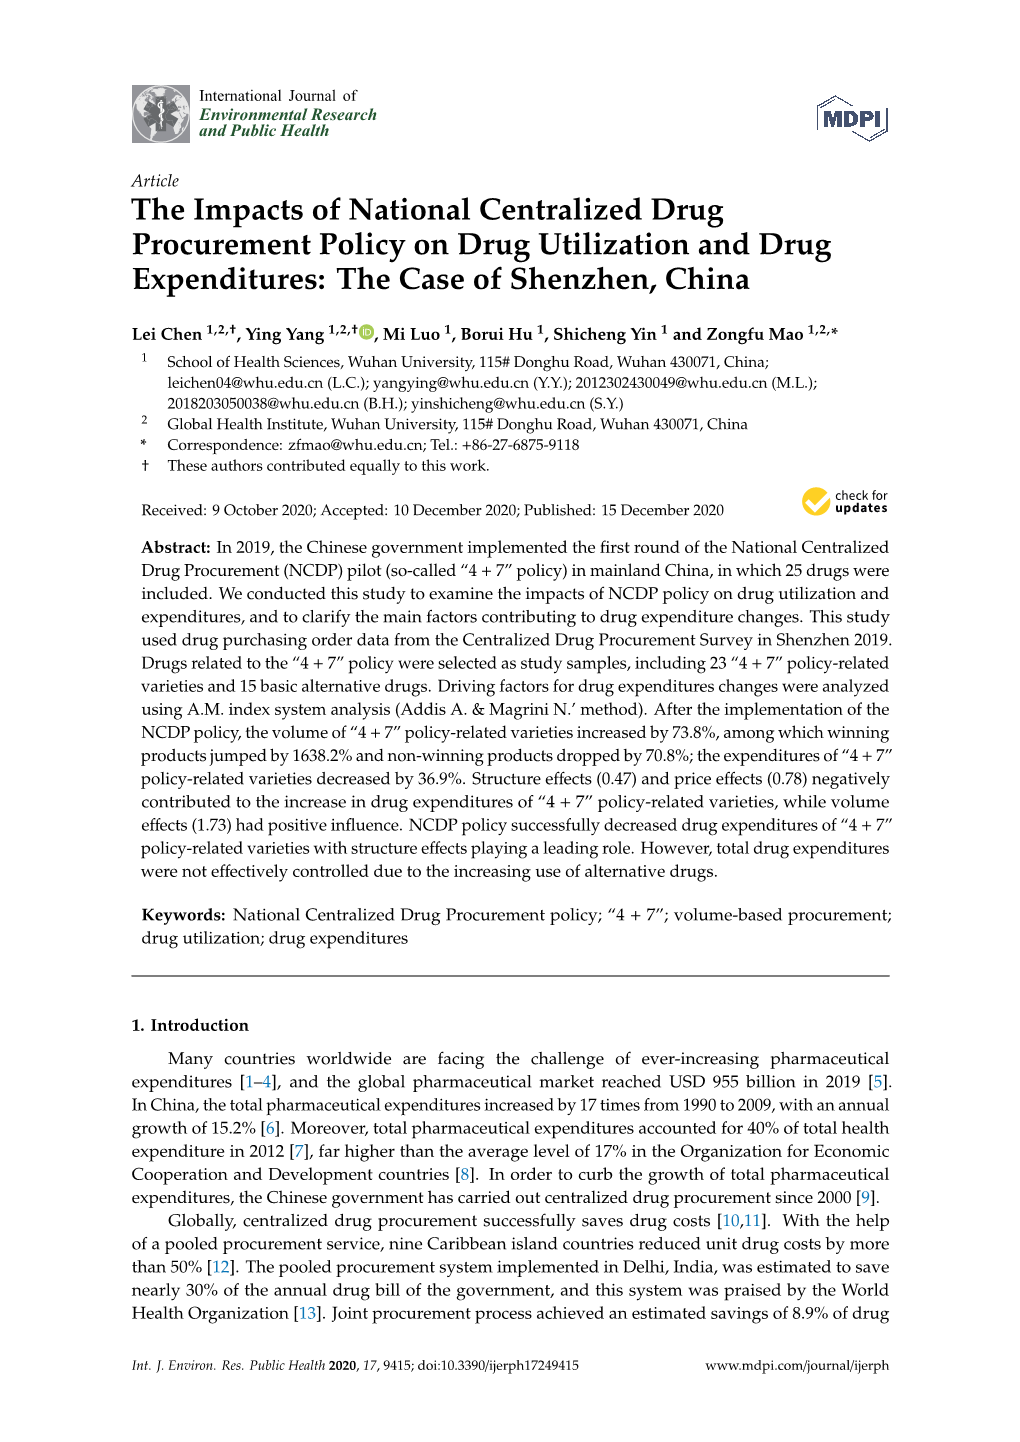 The Impacts of National Centralized Drug Procurement Policy on Drug Utilization and Drug Expenditures: the Case of Shenzhen, China